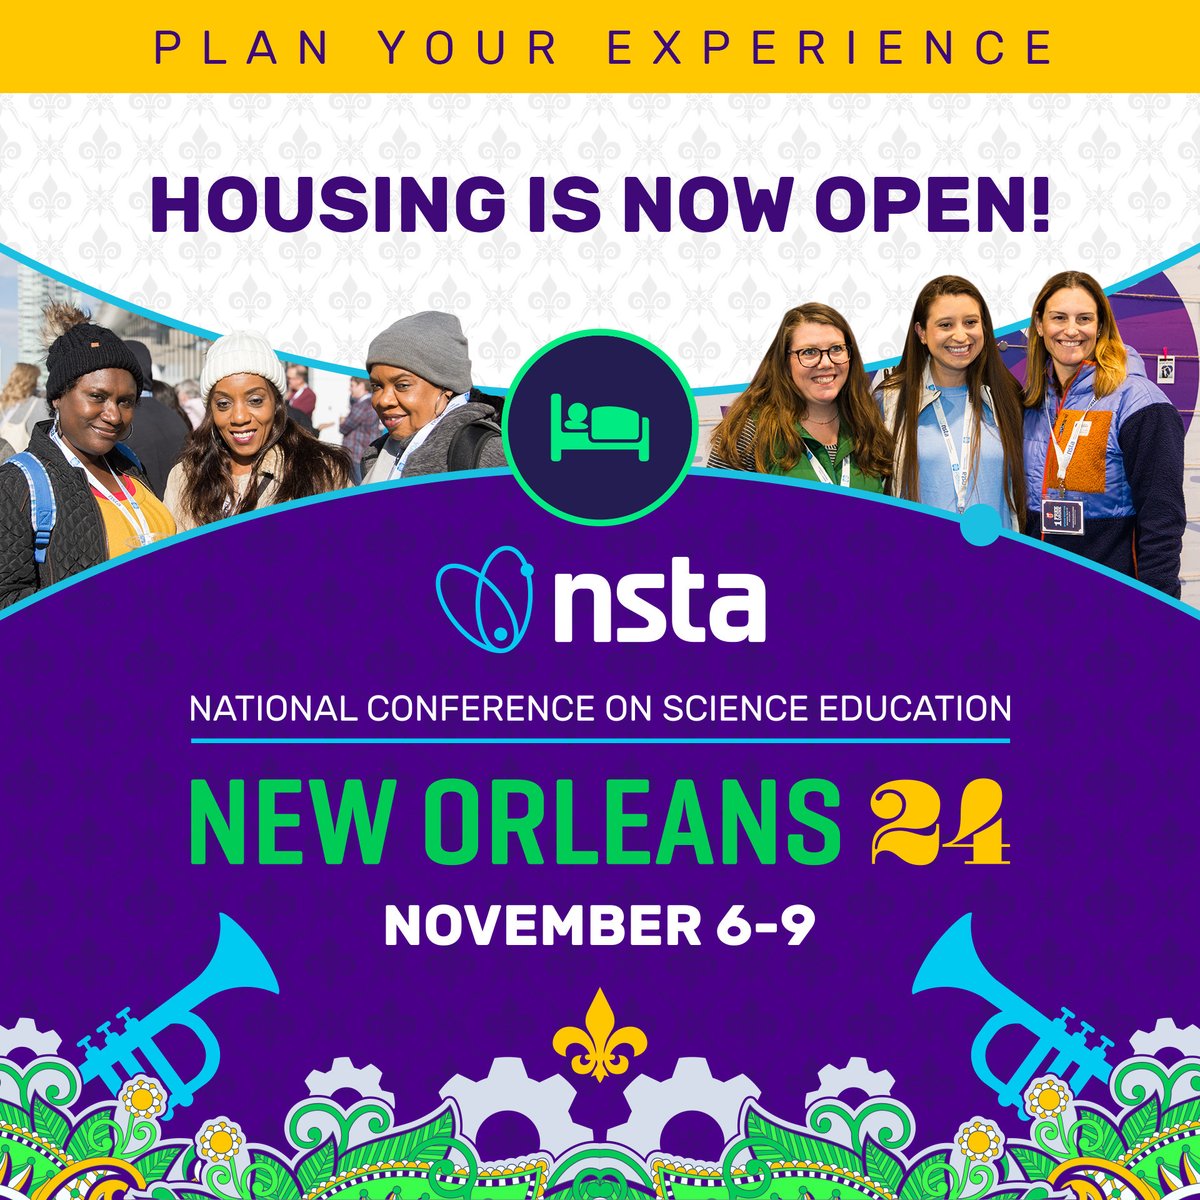 Joining #NSTA for #NOLA24? Housing information and reservations are now available!  Explore hotel options, room rates, trip-planning tools, and more! Browse and book your preferred accommodation here: bit.ly/3yfWtYf #STEMEd #SciEd